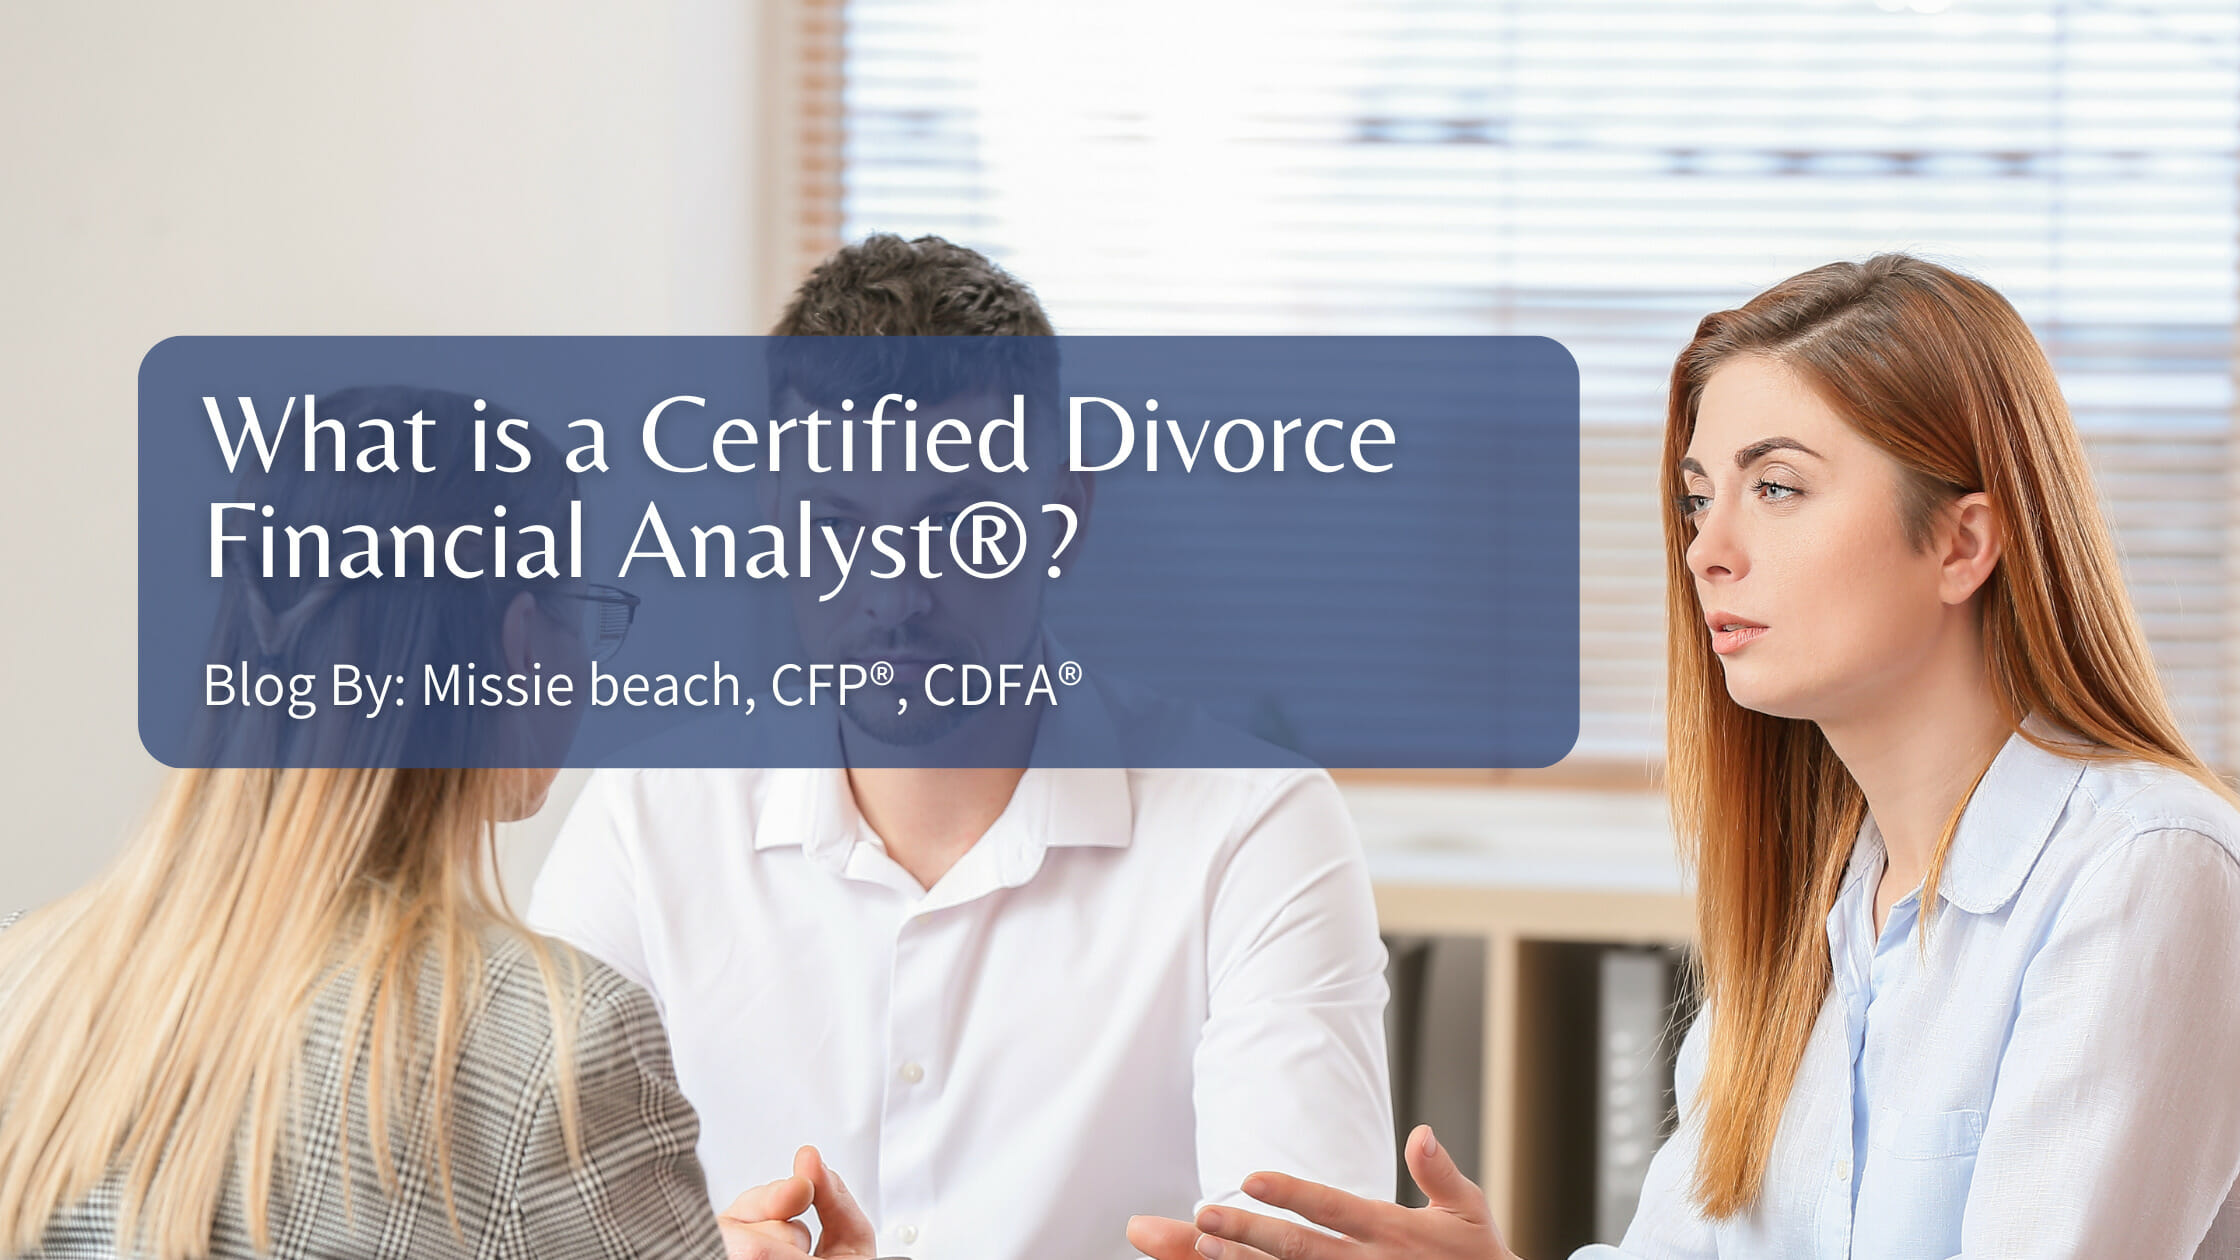 What is a Certified Divorce financial analyst?